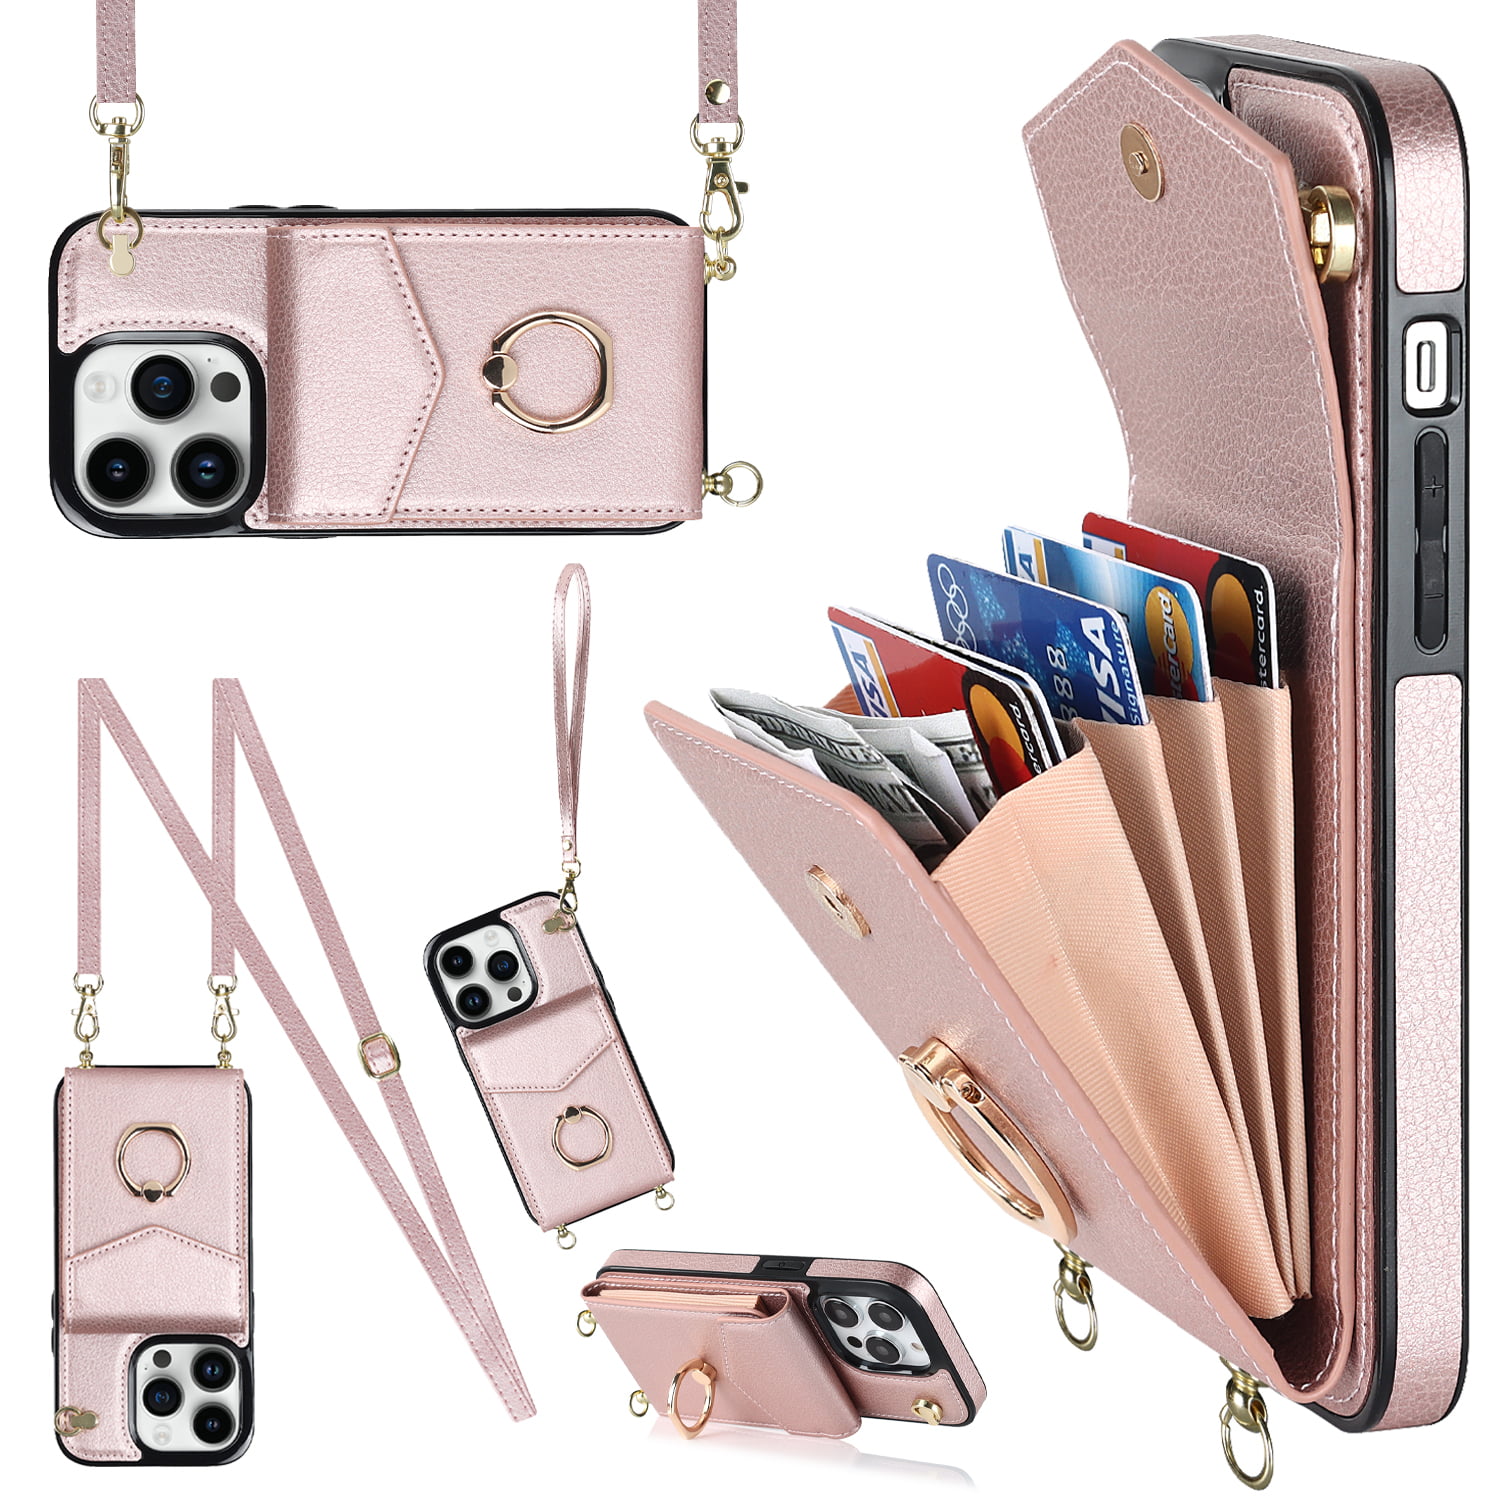 Nalacover Wallet Case for iPhone 12 Pro Max, PU Leather Shoulder Strap  Lanyard Crossbody Back Card Slot Bag Magnetic Cover with RFID Blocking Ring  Holder Kickstand Soft TPU Bumper Case,Rosegold 